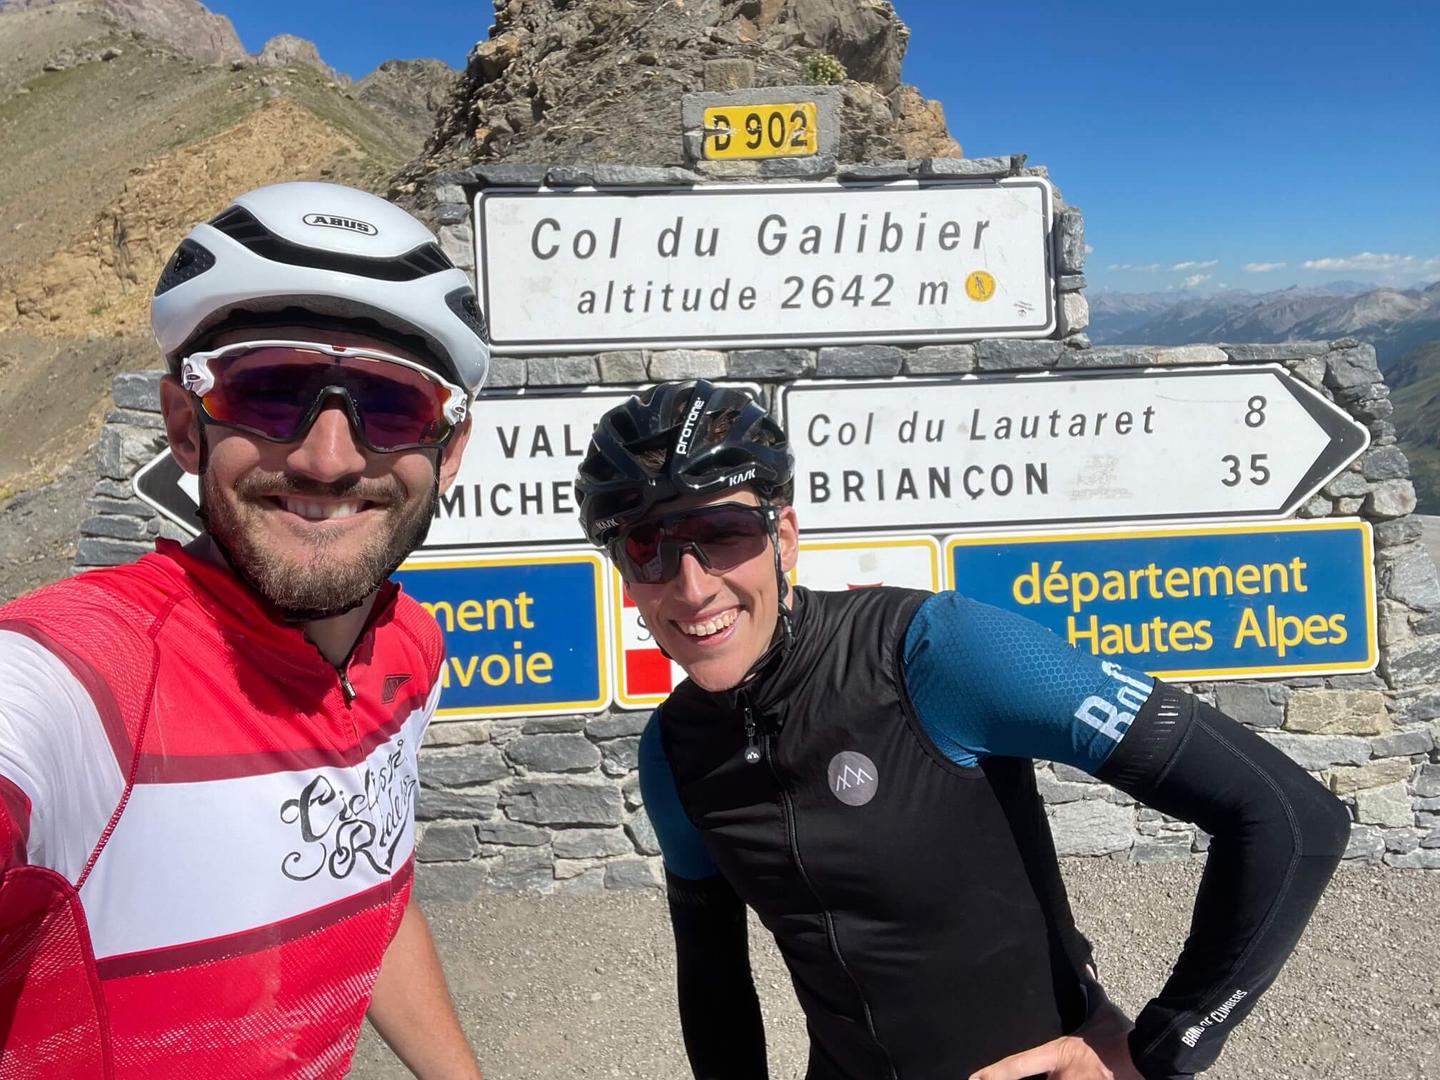 Two cyclists celebrating at Col du Galibier altitude sign, Hautes Alpes, France, scenic mountain background.